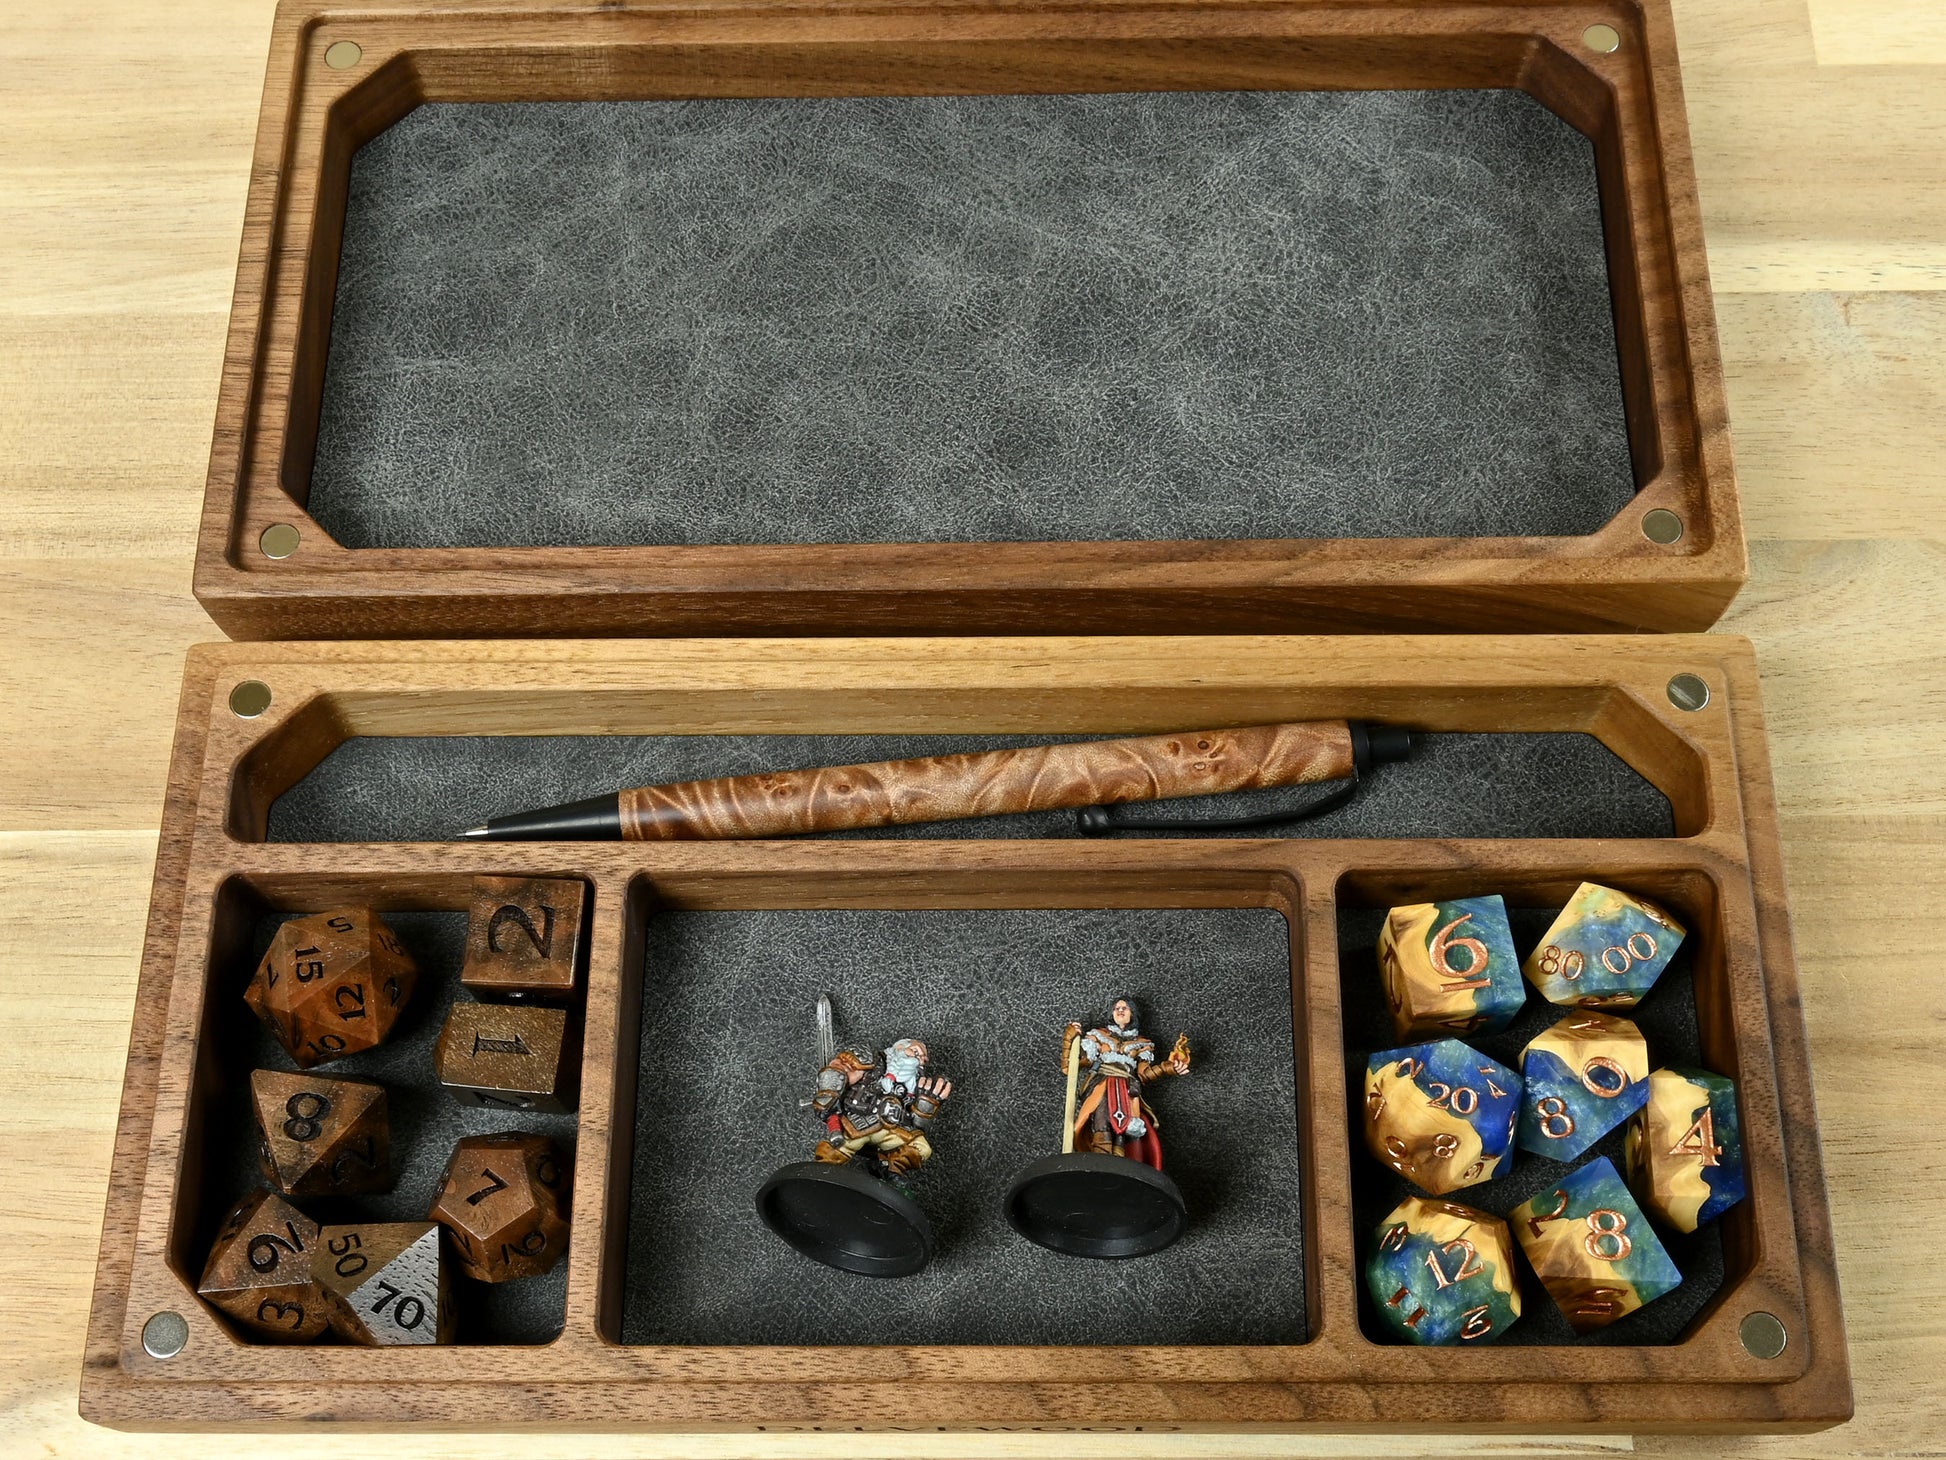 Interior view of Delver Dice Box and Tray for dnd rpg